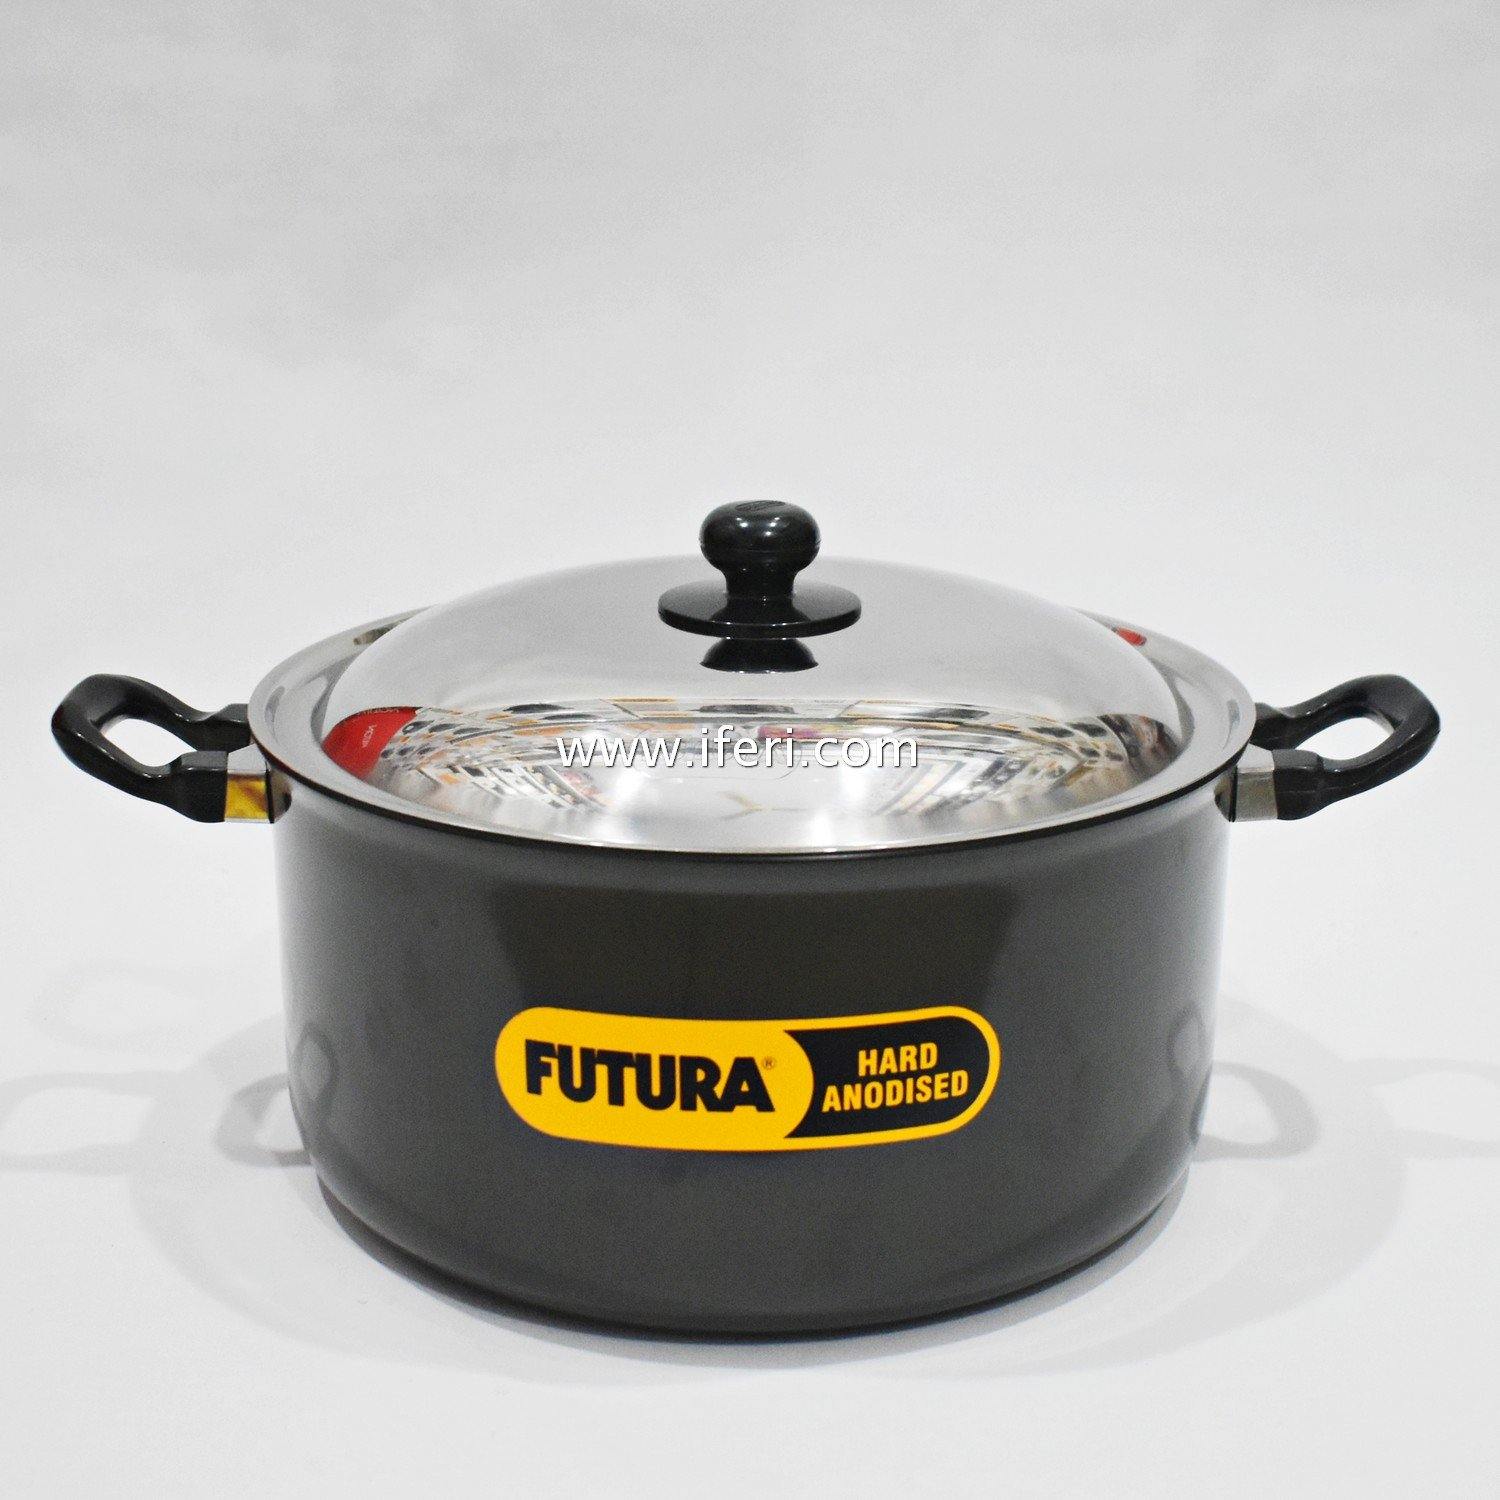 8.5 Liter Futura Hard Anodized Stew Pot With SS Lid MBT9898 - Price in BD at iferi.com